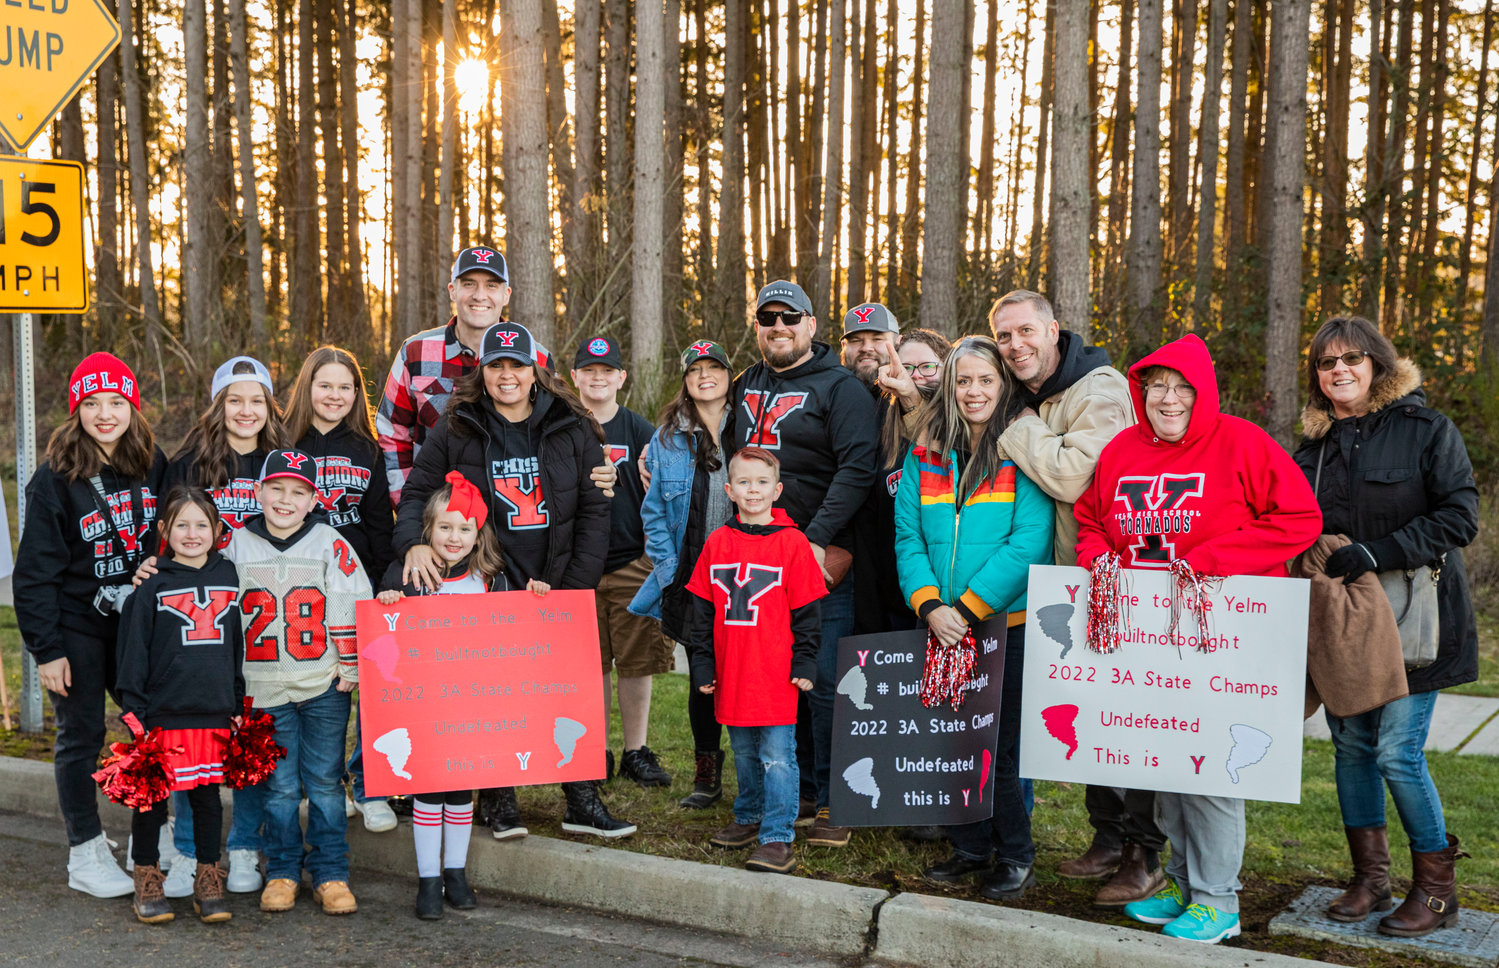 Tornado football fans smile for a photo while holding signs for a celebration parade in Yelm Monday evening.